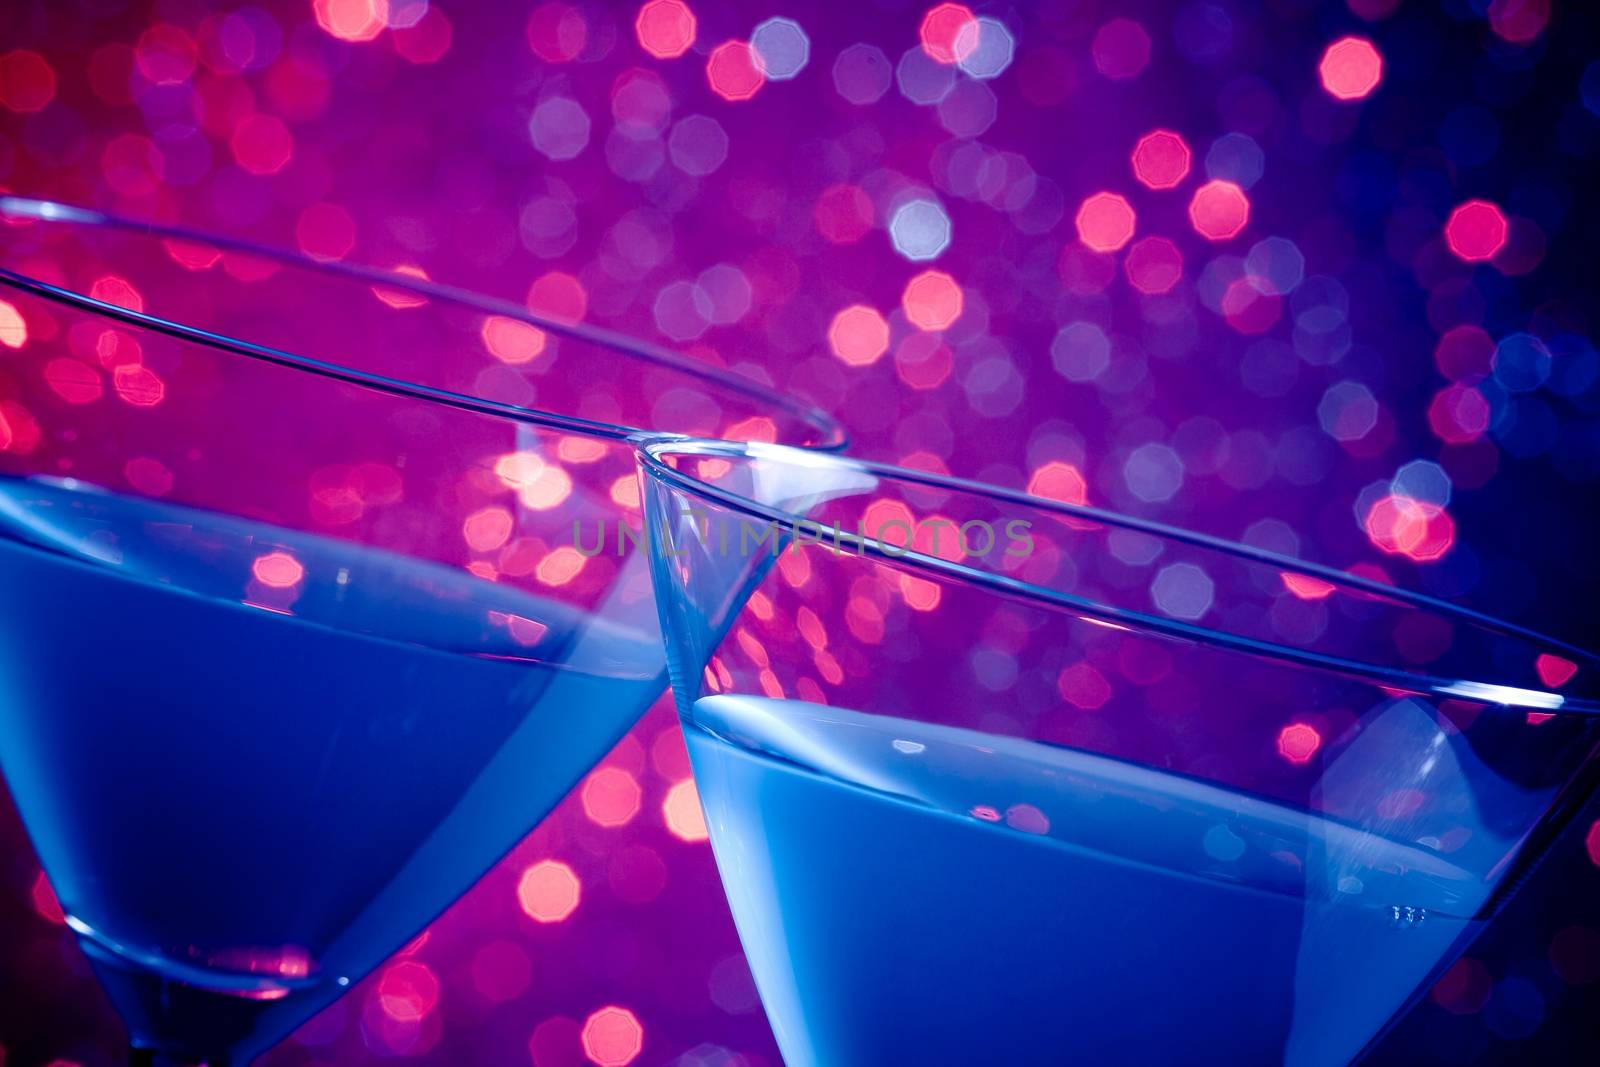 detail of a pair of glasses of blue cocktail on blue and violet tint light bokeh background